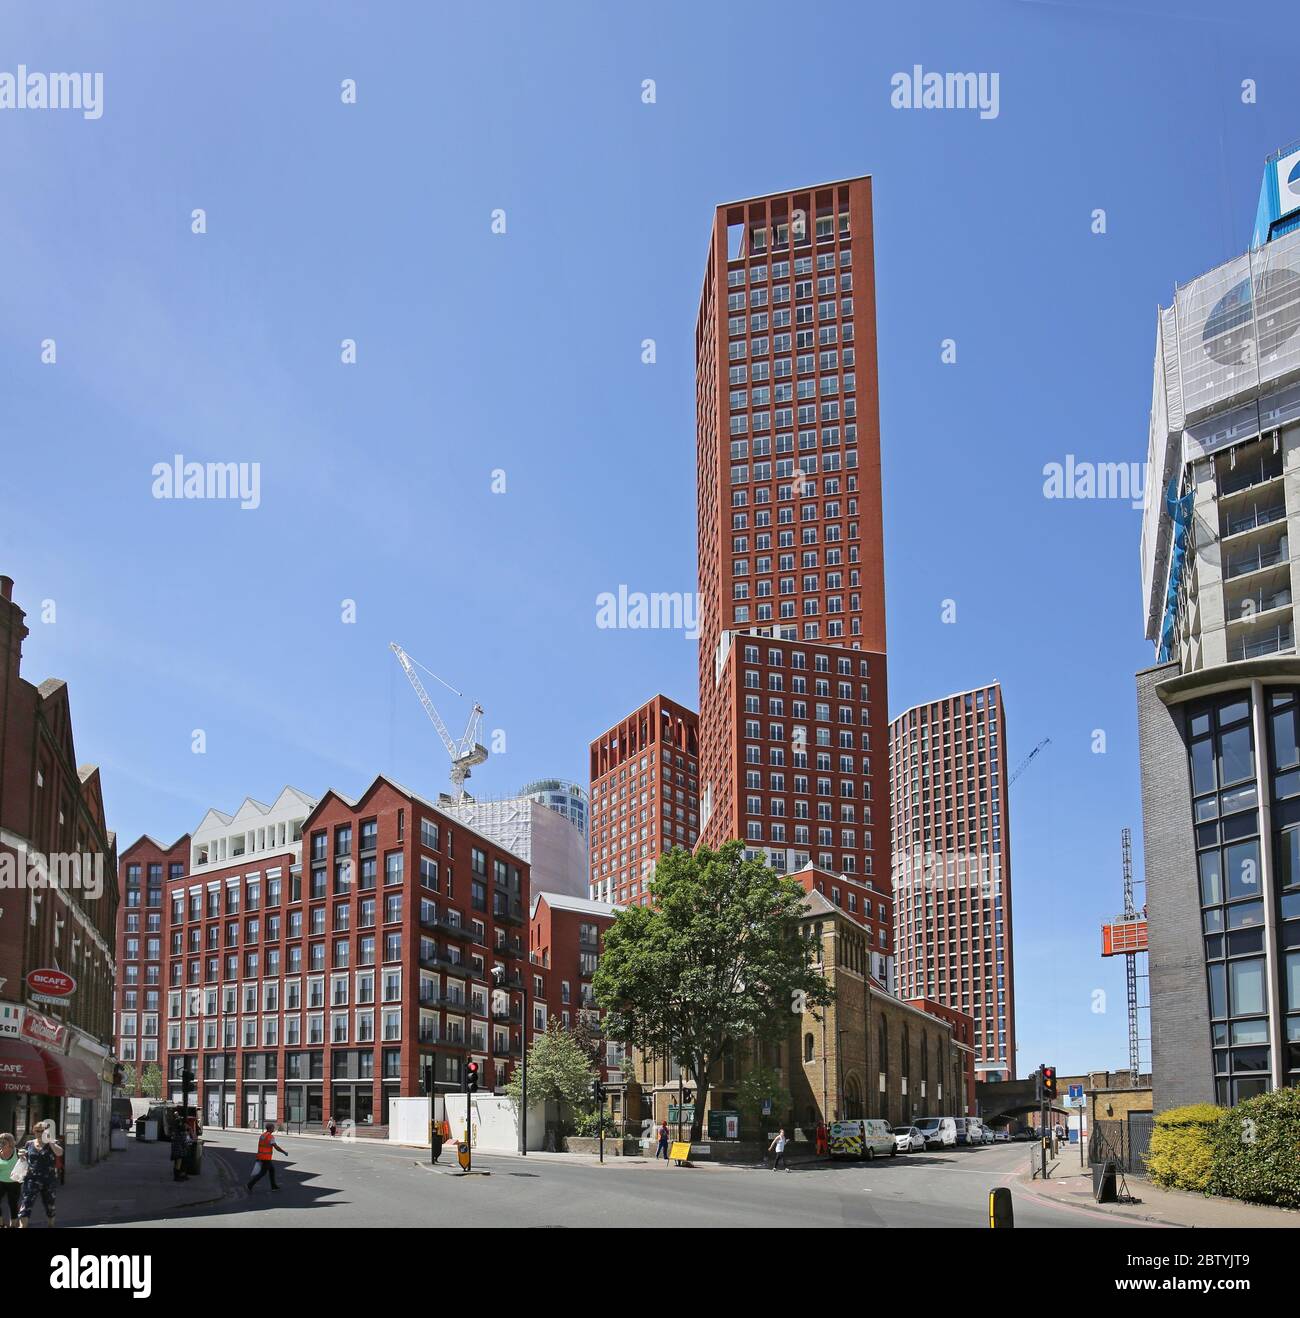 New residential towers in London's Vauxhall district. Corner of South Lambeth Road and Miles Street Stock Photo